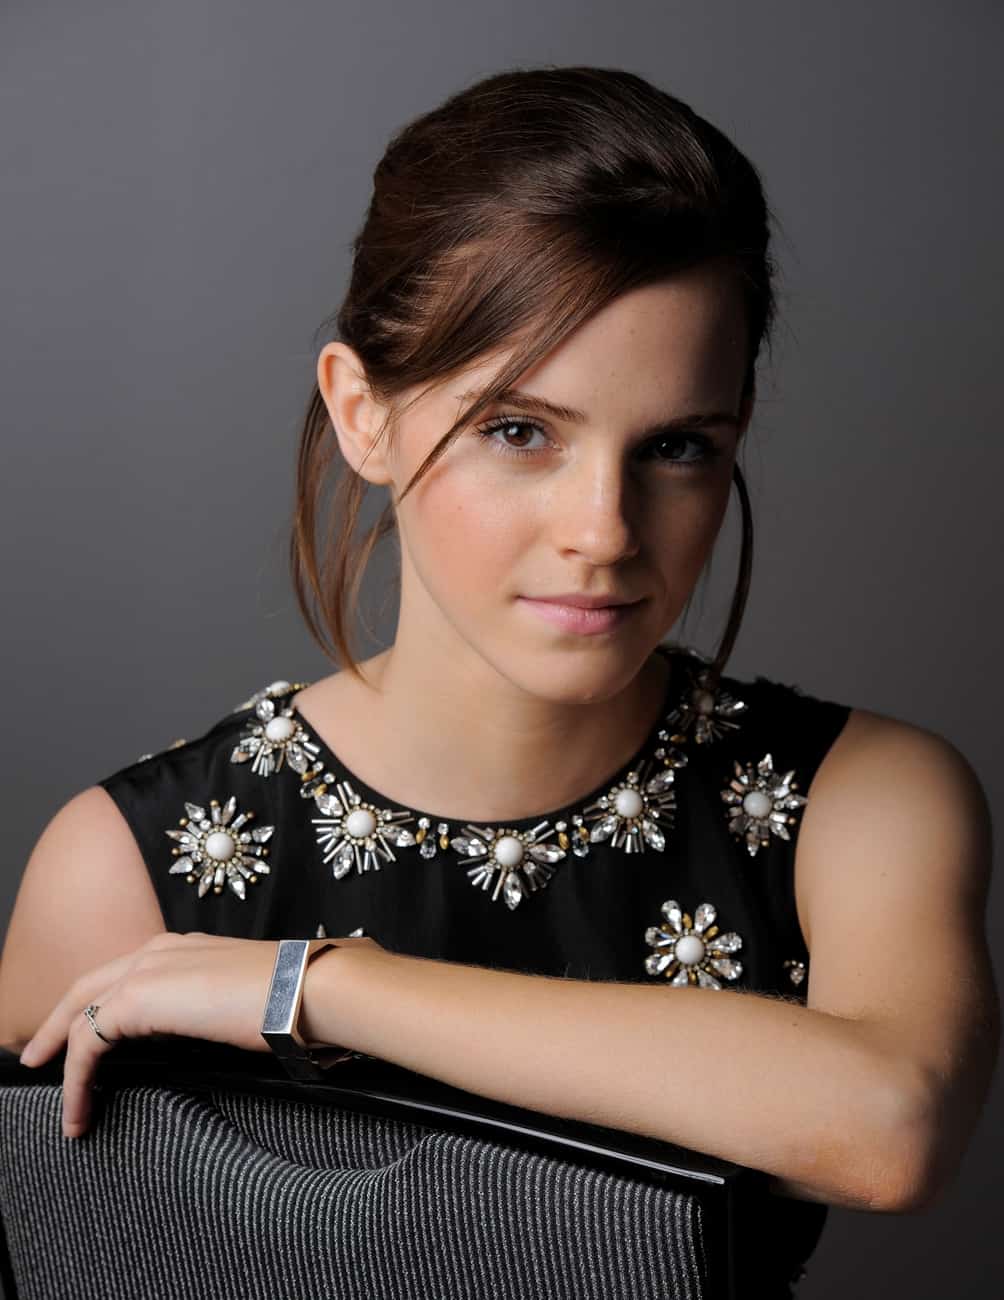 Emma Watson Oozes Beauty at the Photoshoot at the St. Regis Hotel in Canada